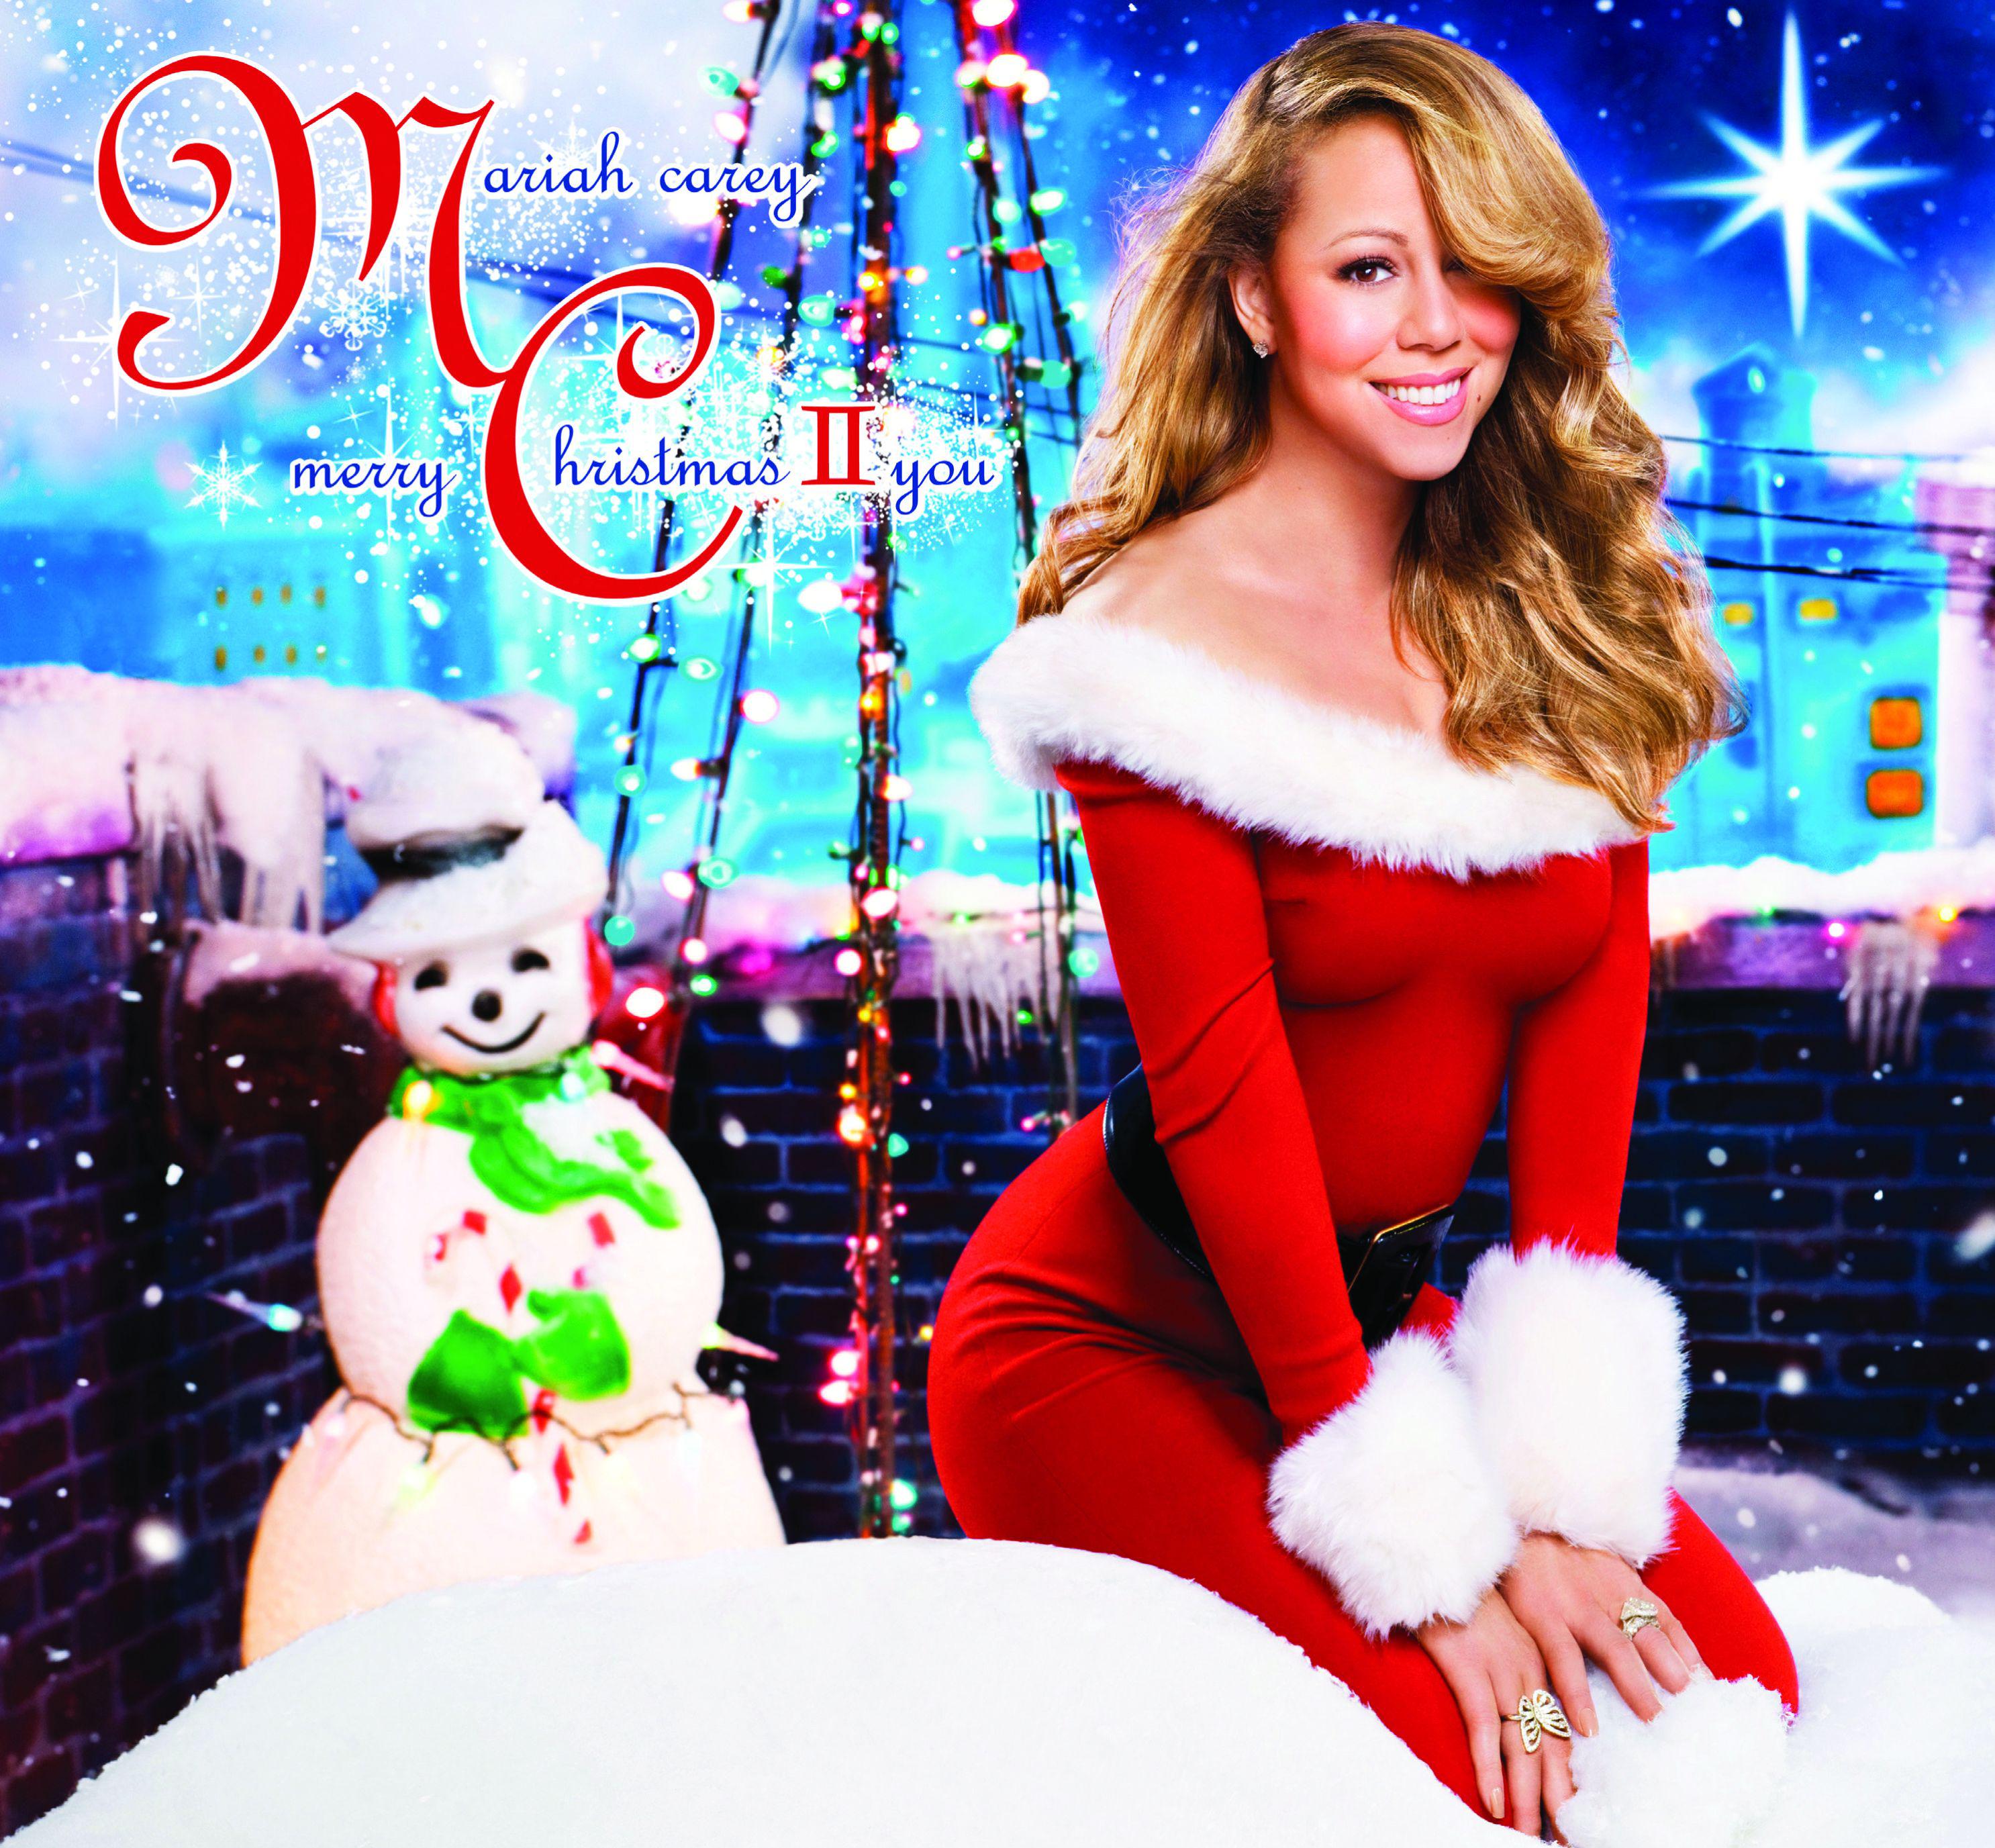 Mariah Carey accusata di aver copiato 'All I Want for Christmas is You'